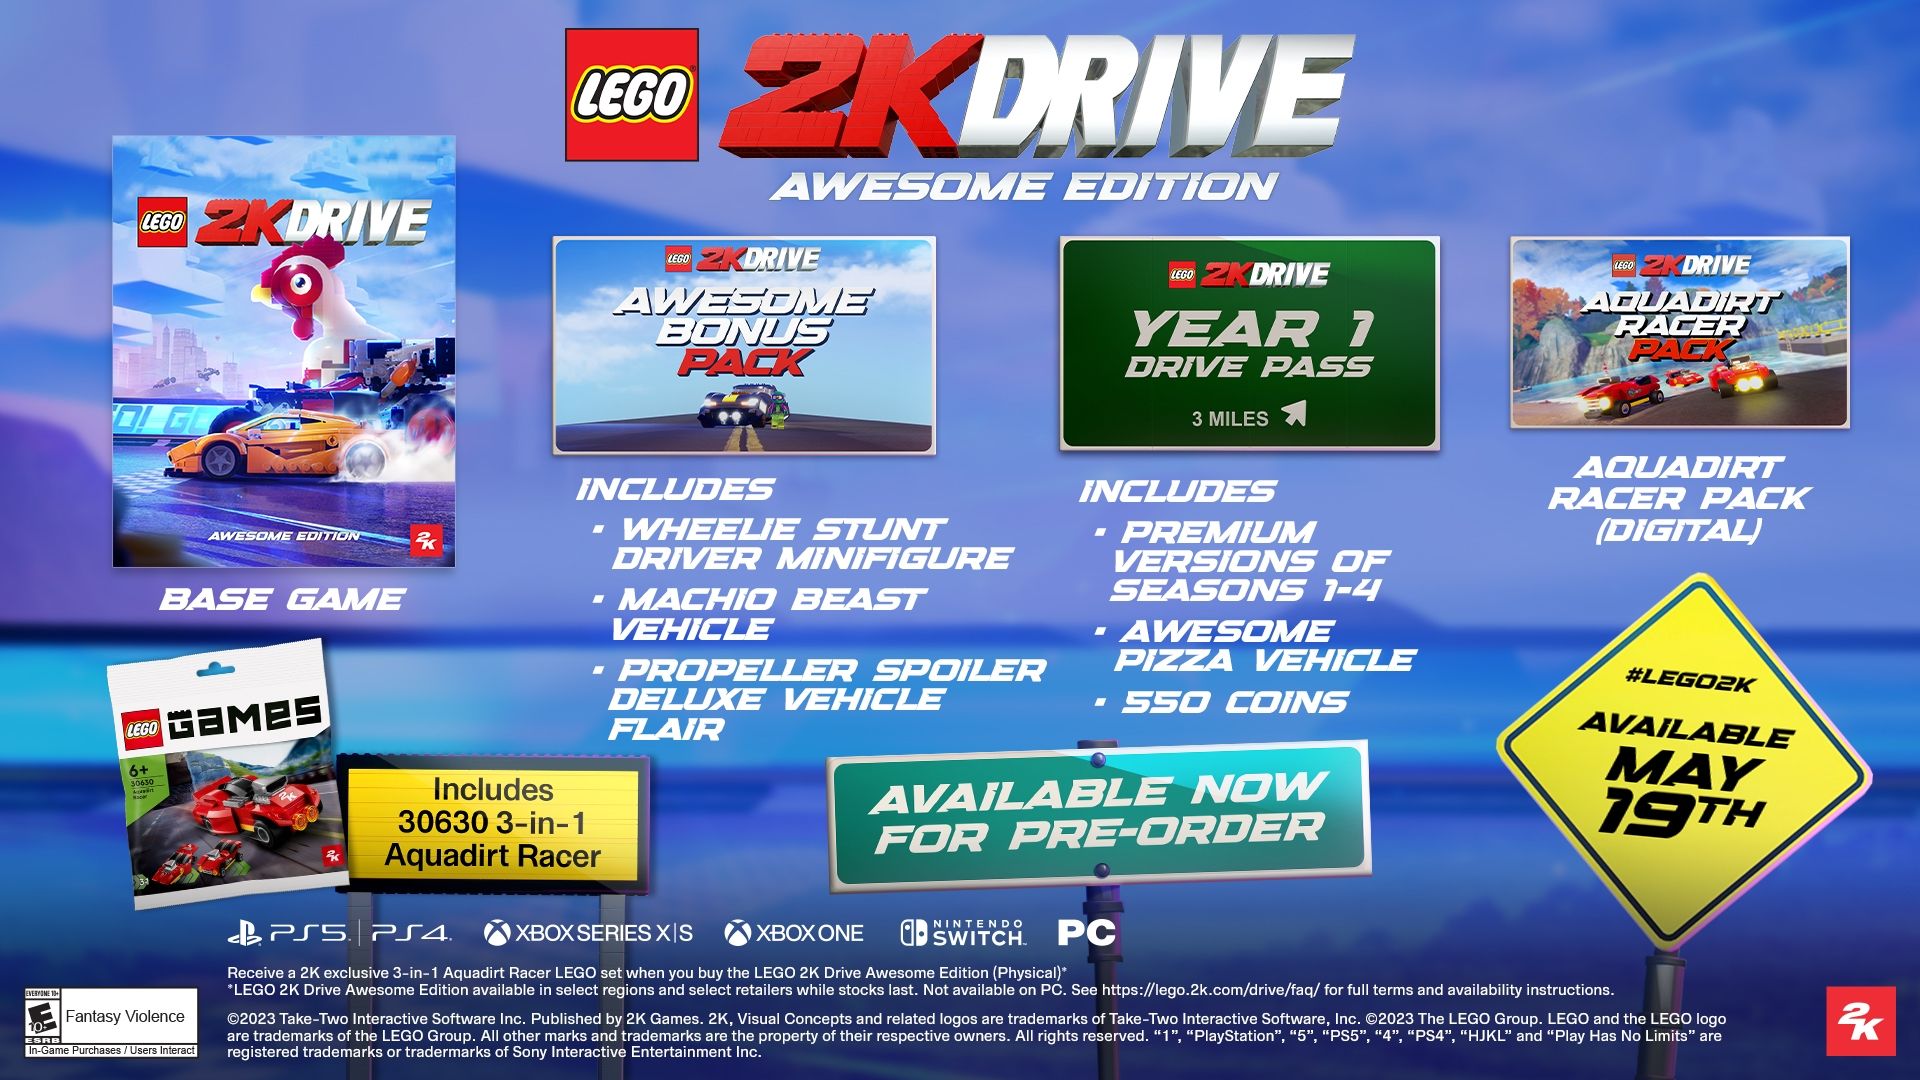 LEGO Gear 5007925 2K Drive Awesome Edition – PlayStation® 5 LEGO_2K_Infographic.jpg